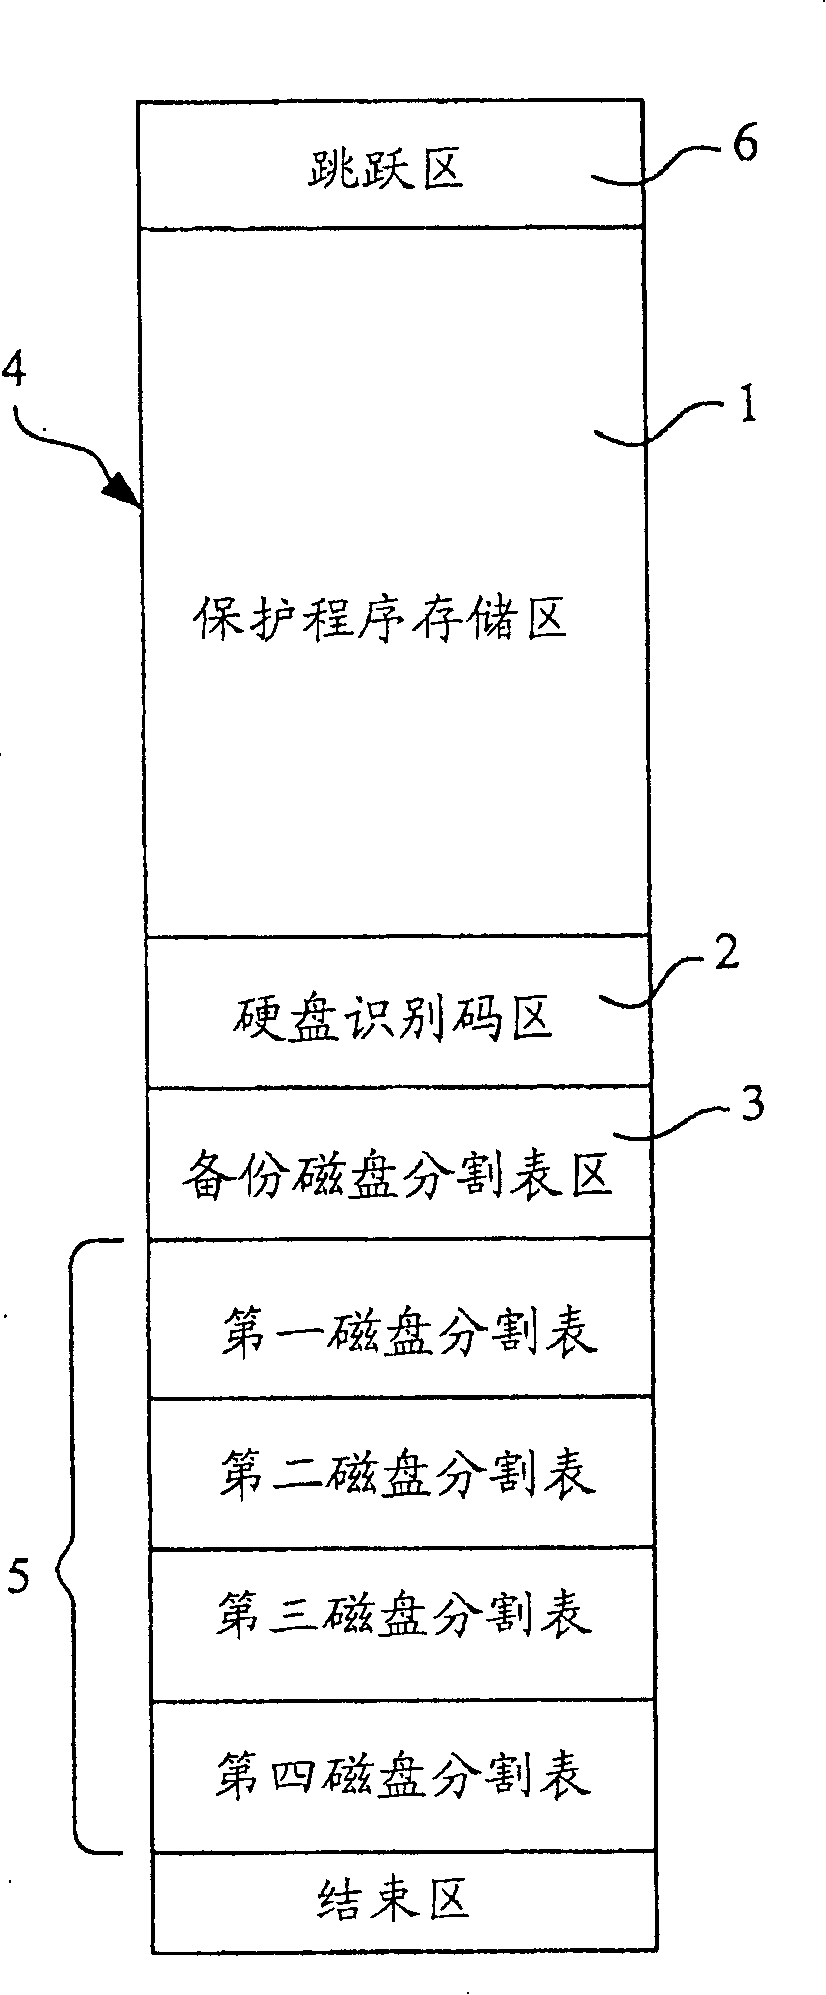 Method for protecting data of hard disk